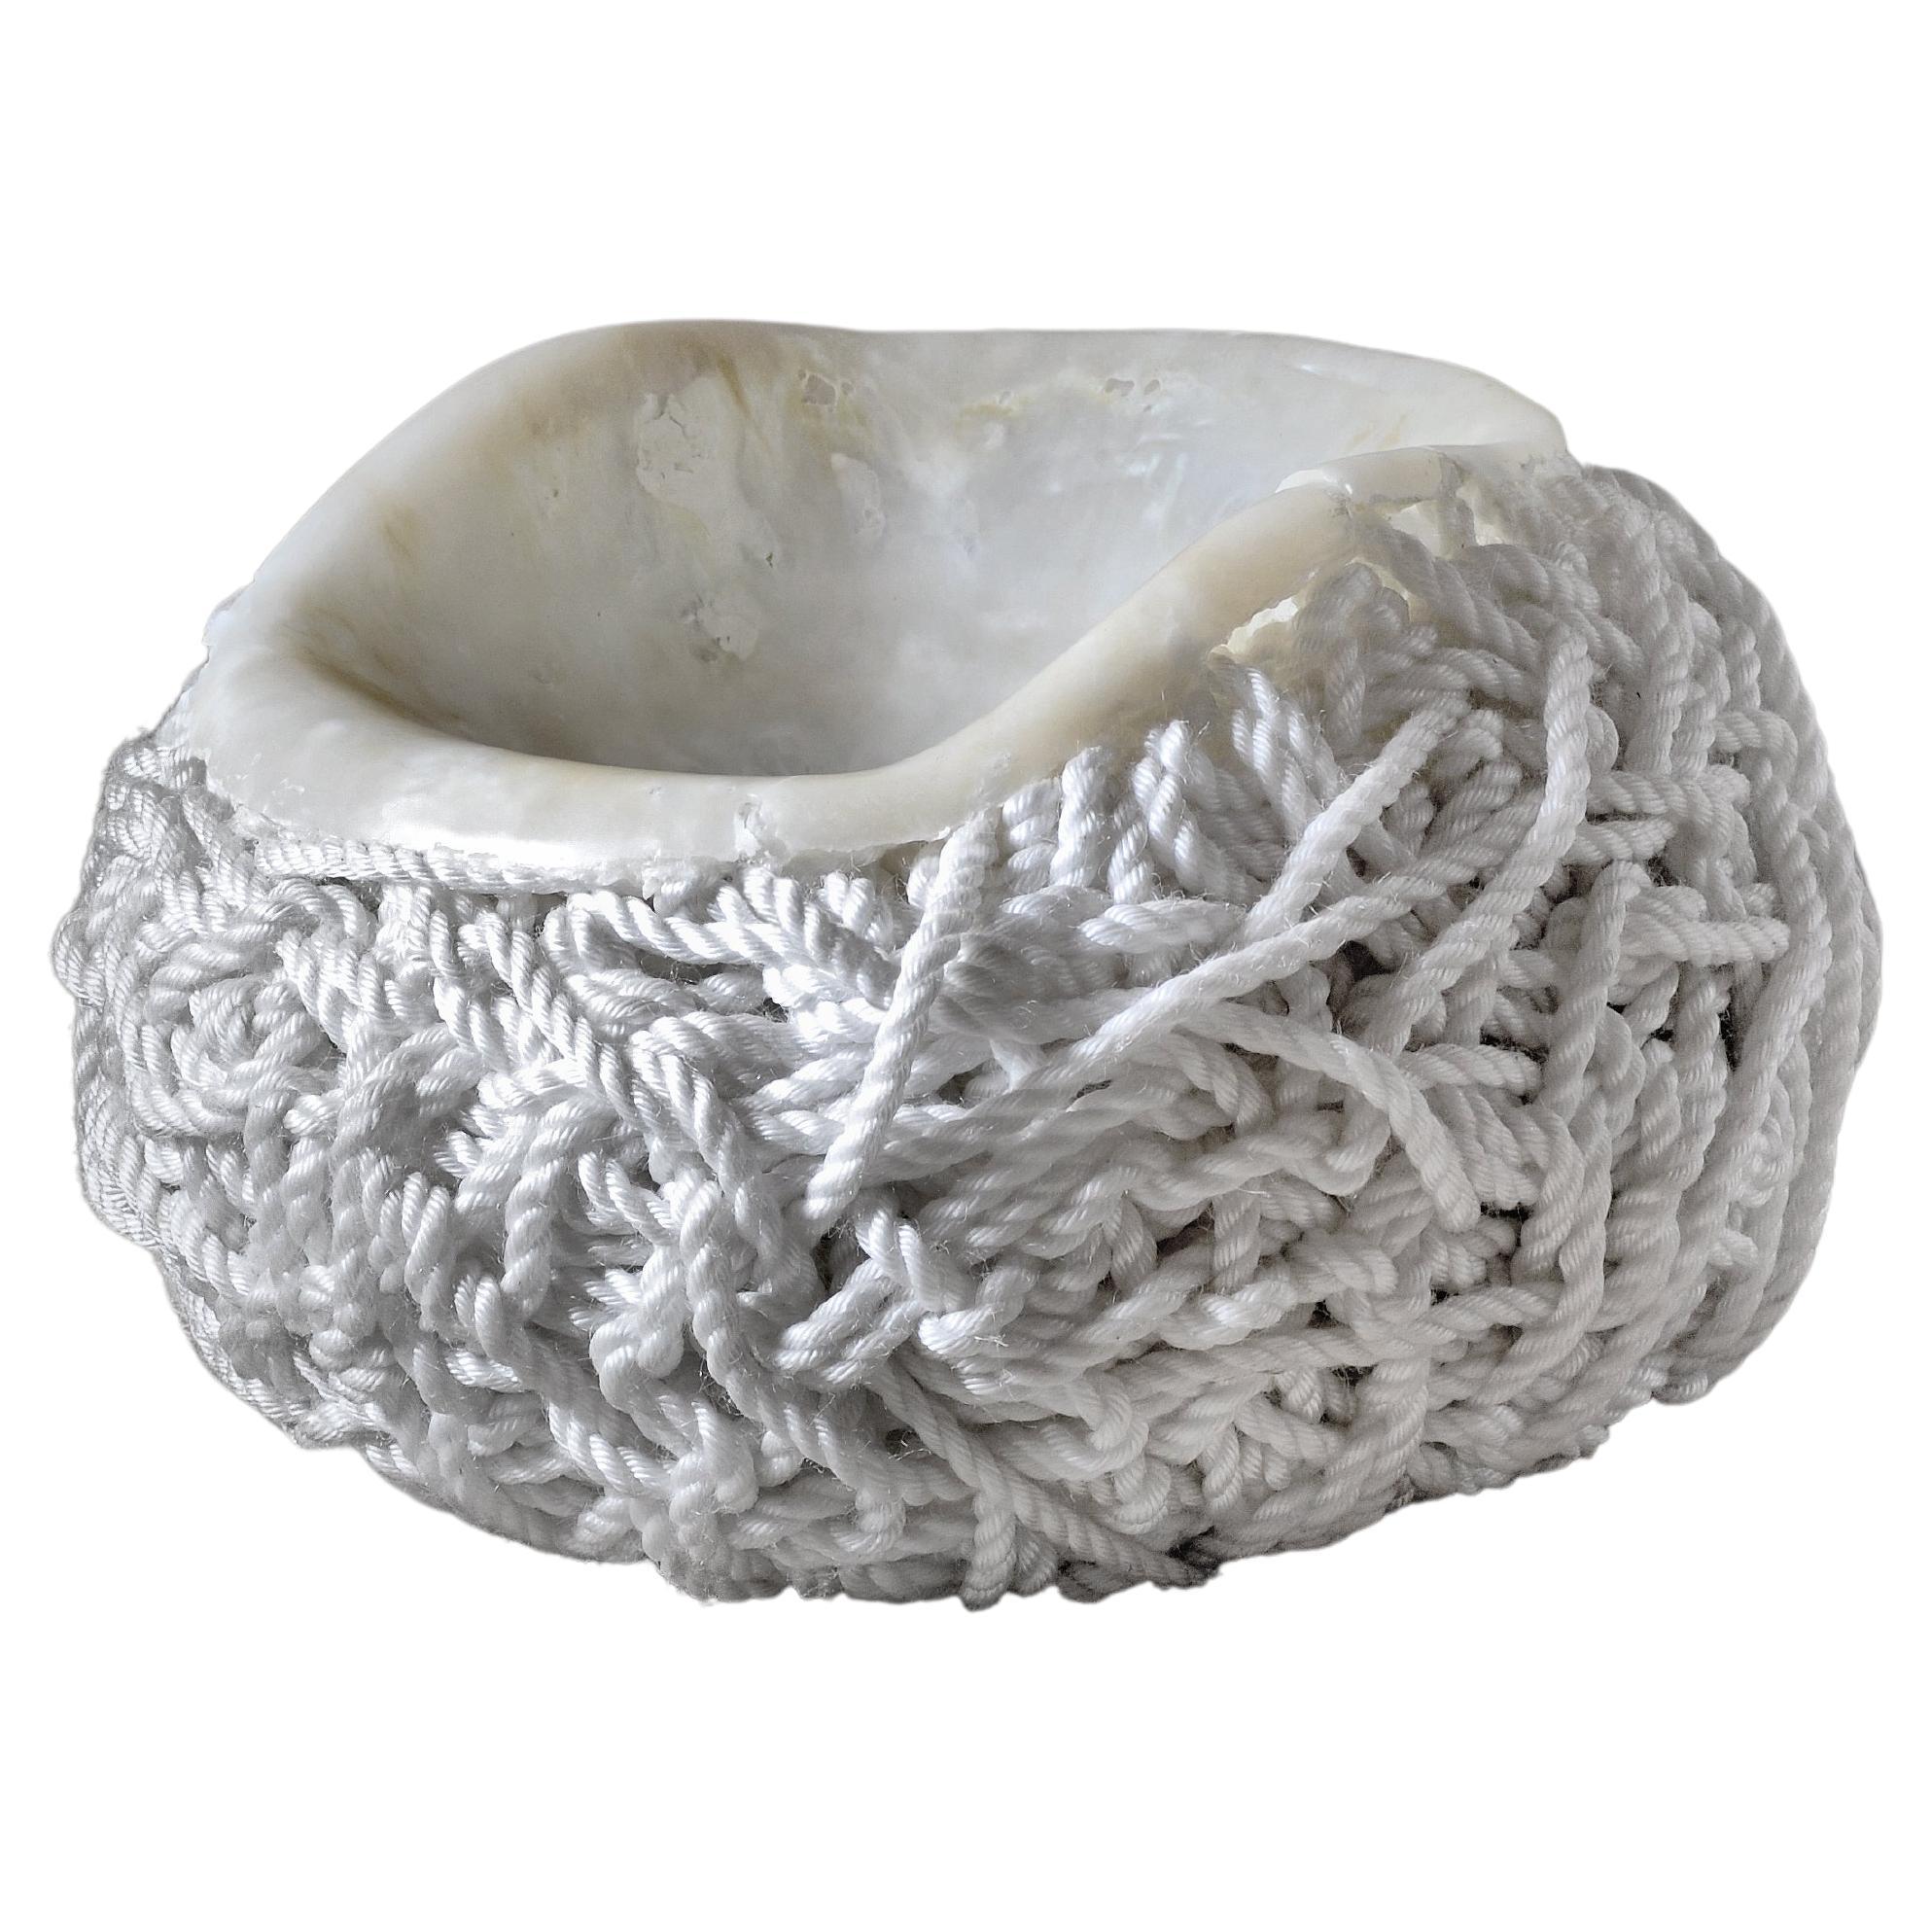 Meltdown Chair, White Rope by Tom Price, Contemporary, Limited Edition